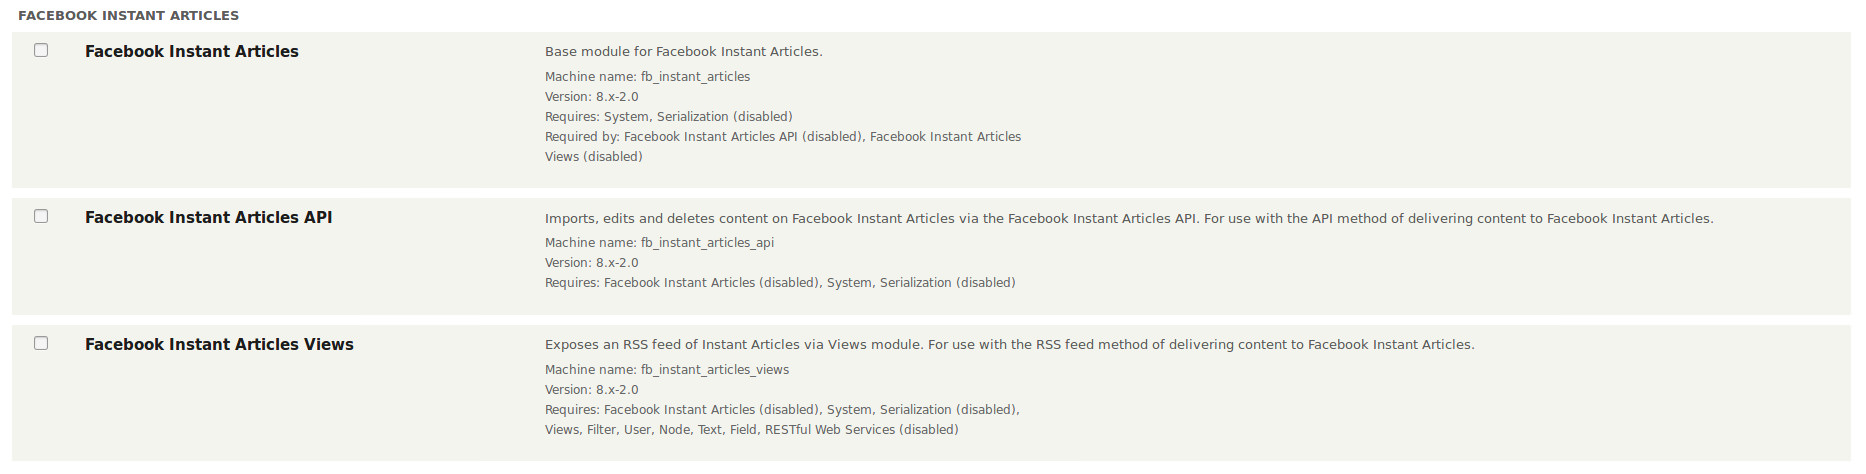 Downloading and installing Facebook Instant Article module 